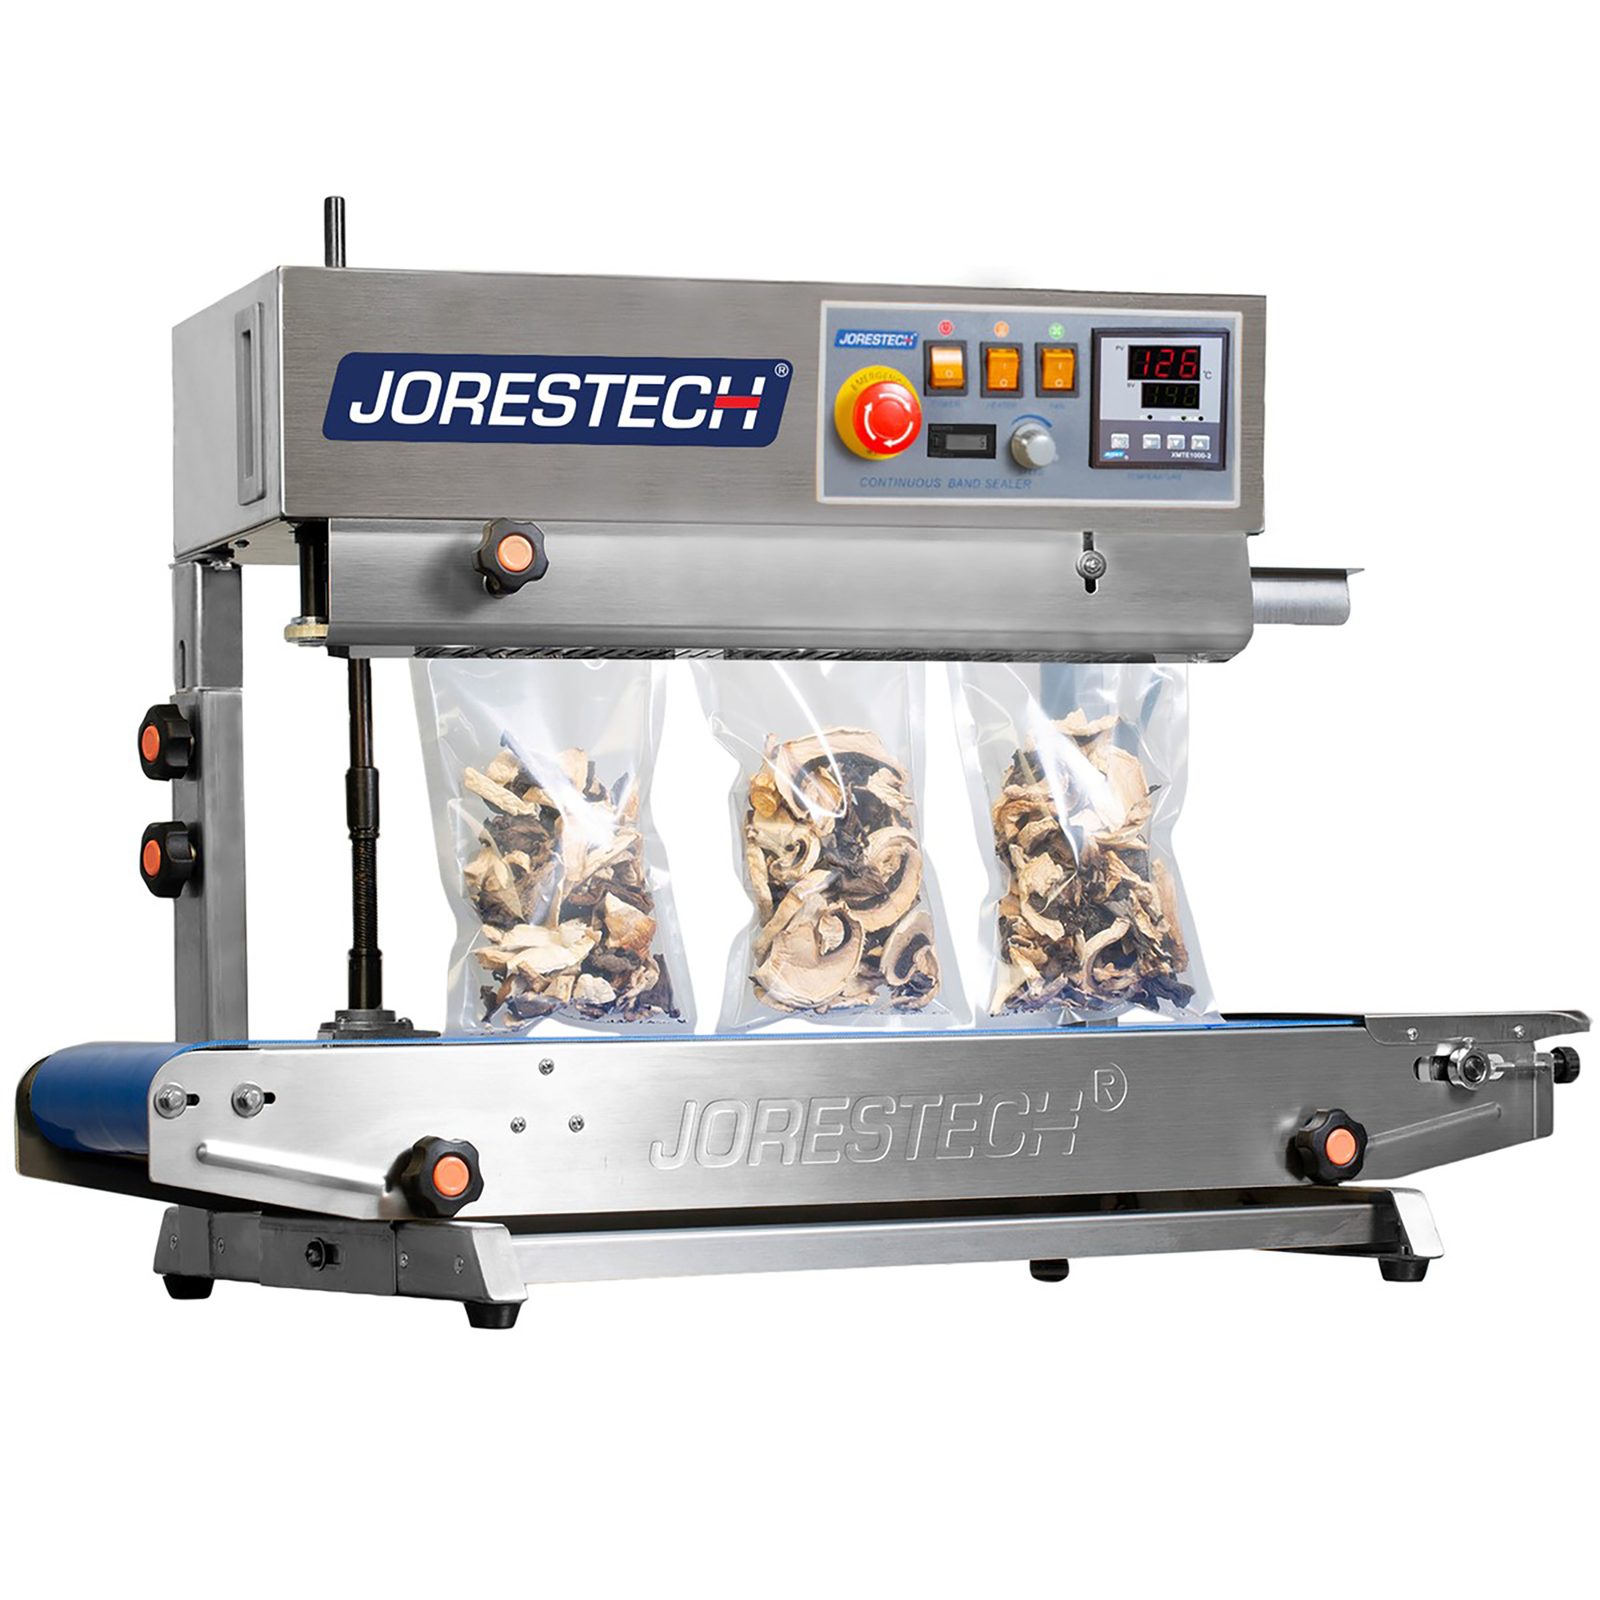 front of the JORESTECH stainless-steel continuous band sealing machine set for vertical applications while sealing 3 clear plastic bags filled with mushrooms